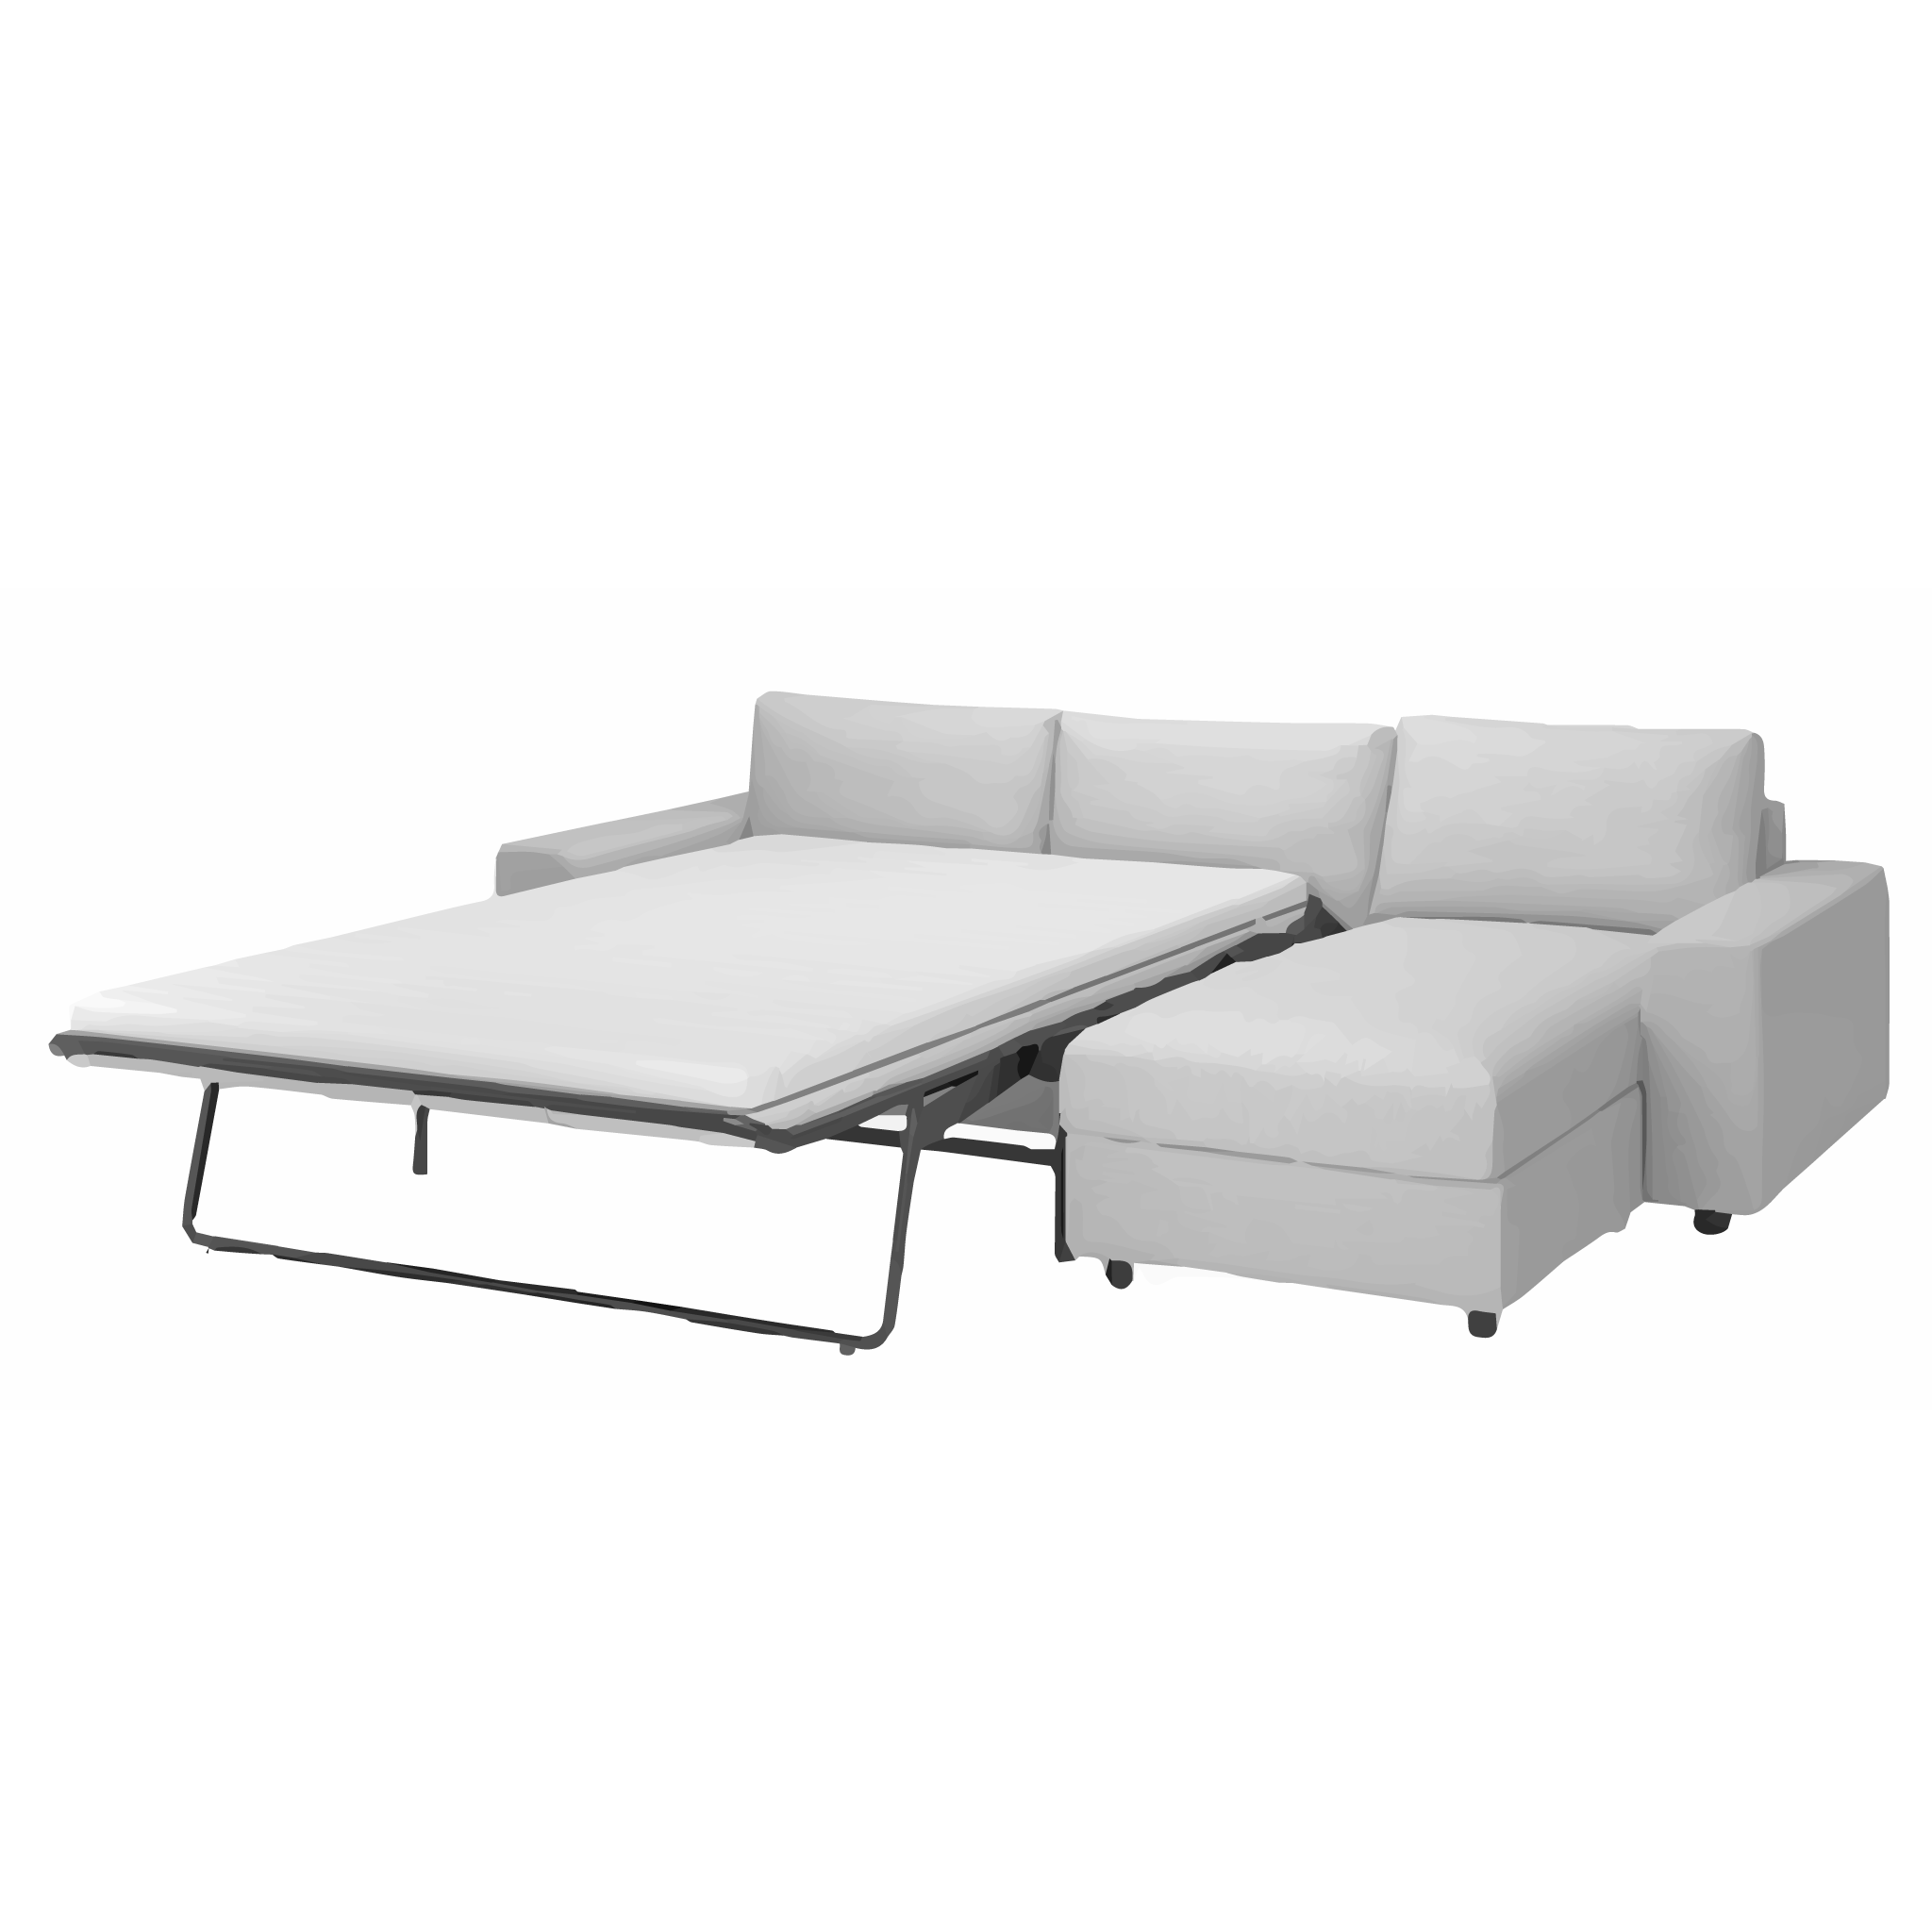 The – Sofa Styled Sofa 5 Page Beds –